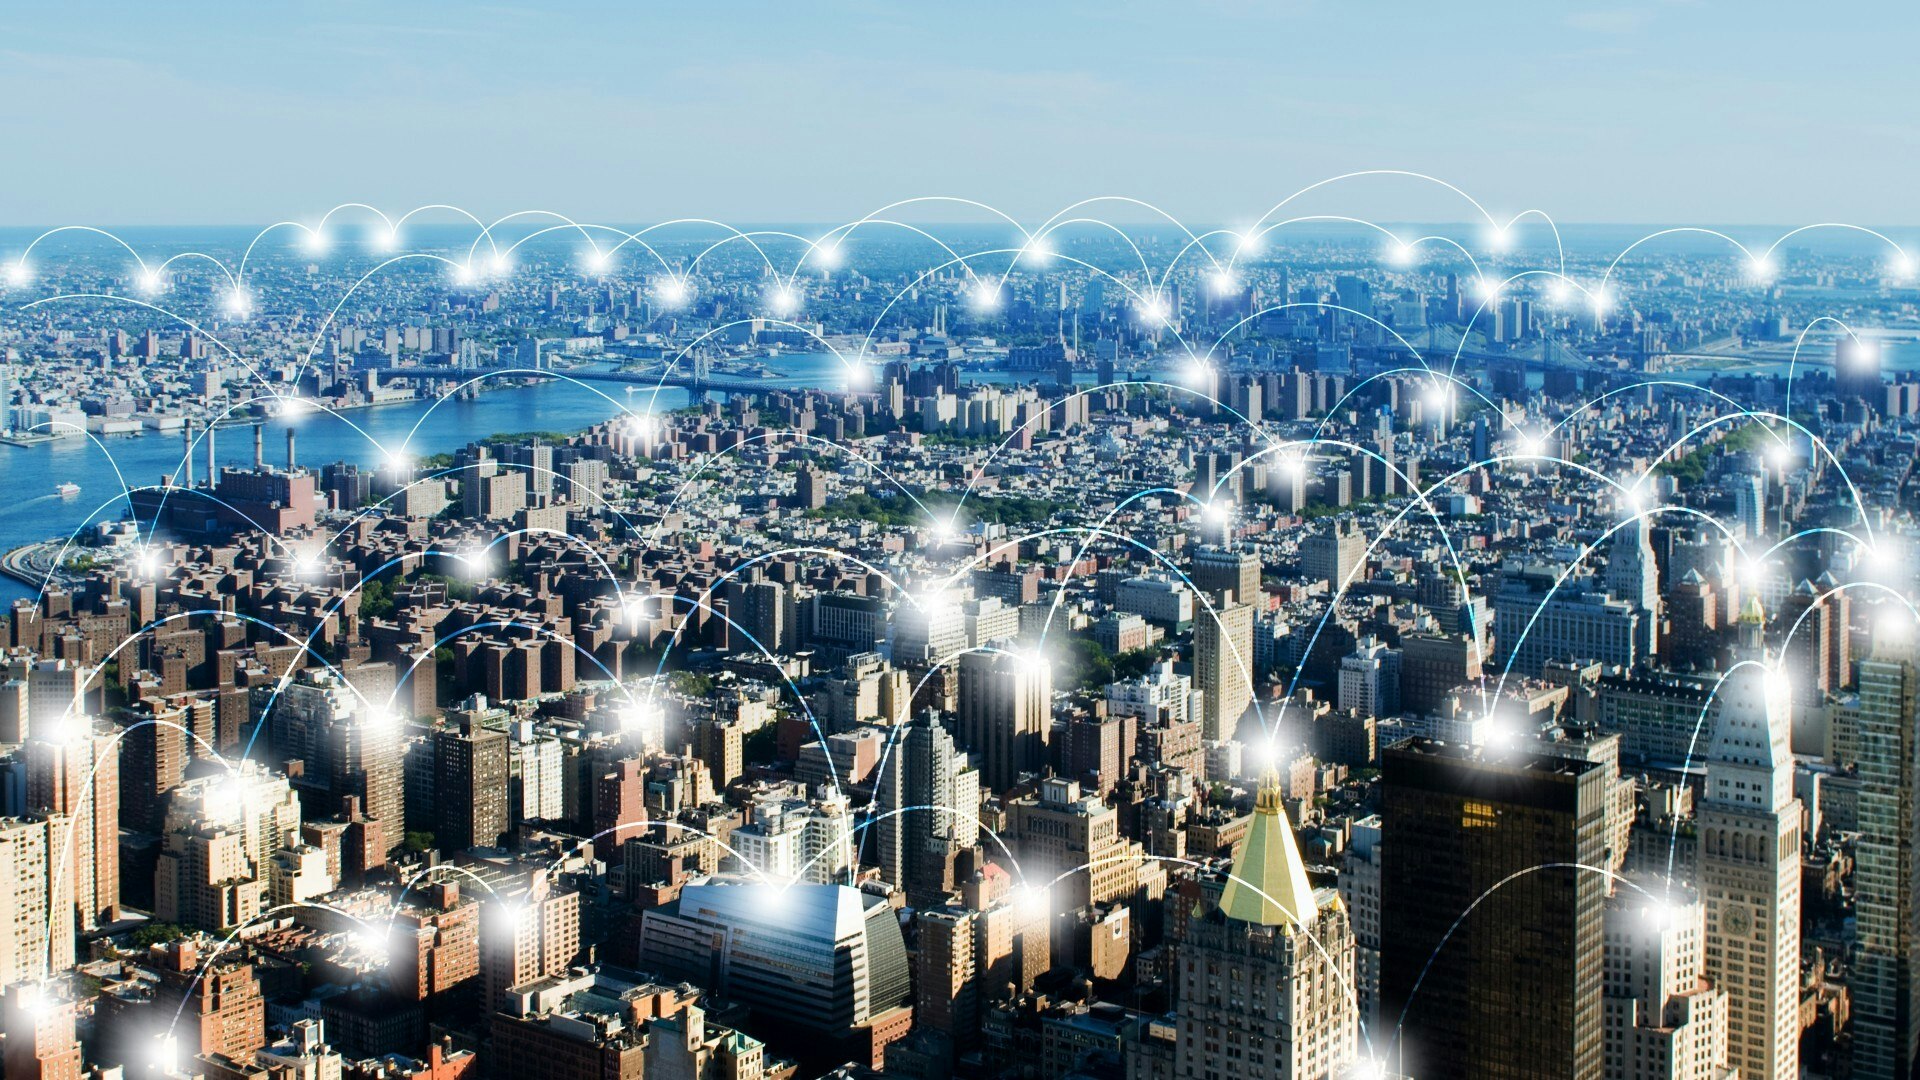 Smart cities air quality sensing – can technology match the hype?